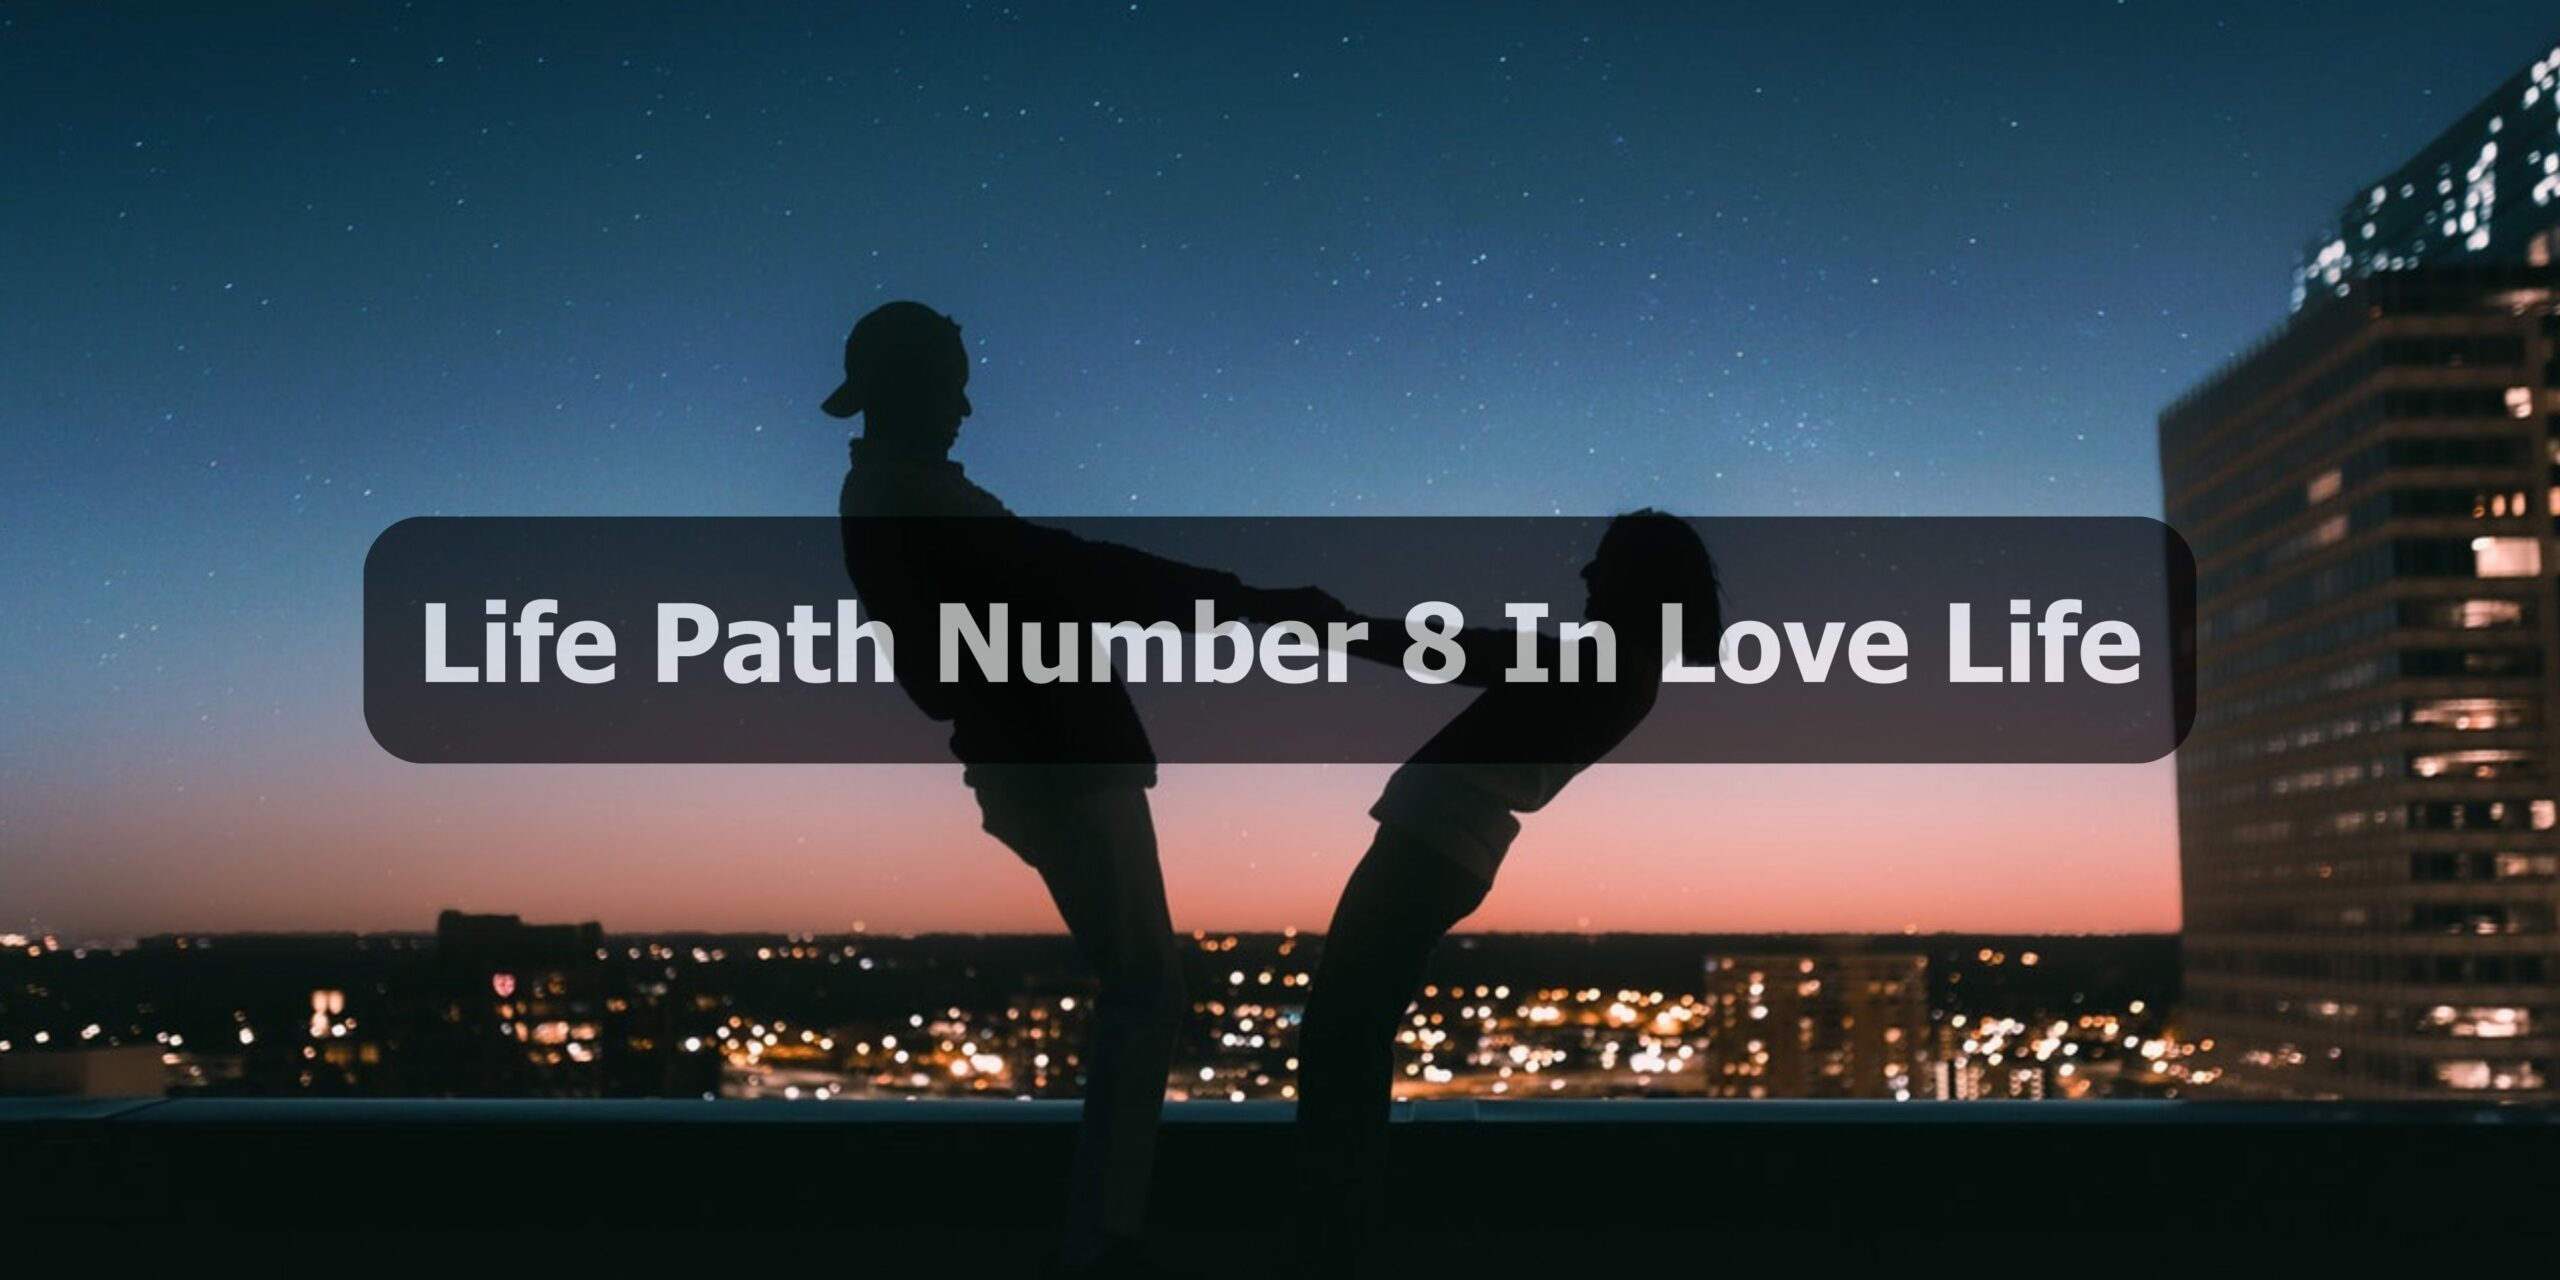 Life Path Number 8 In Love Life